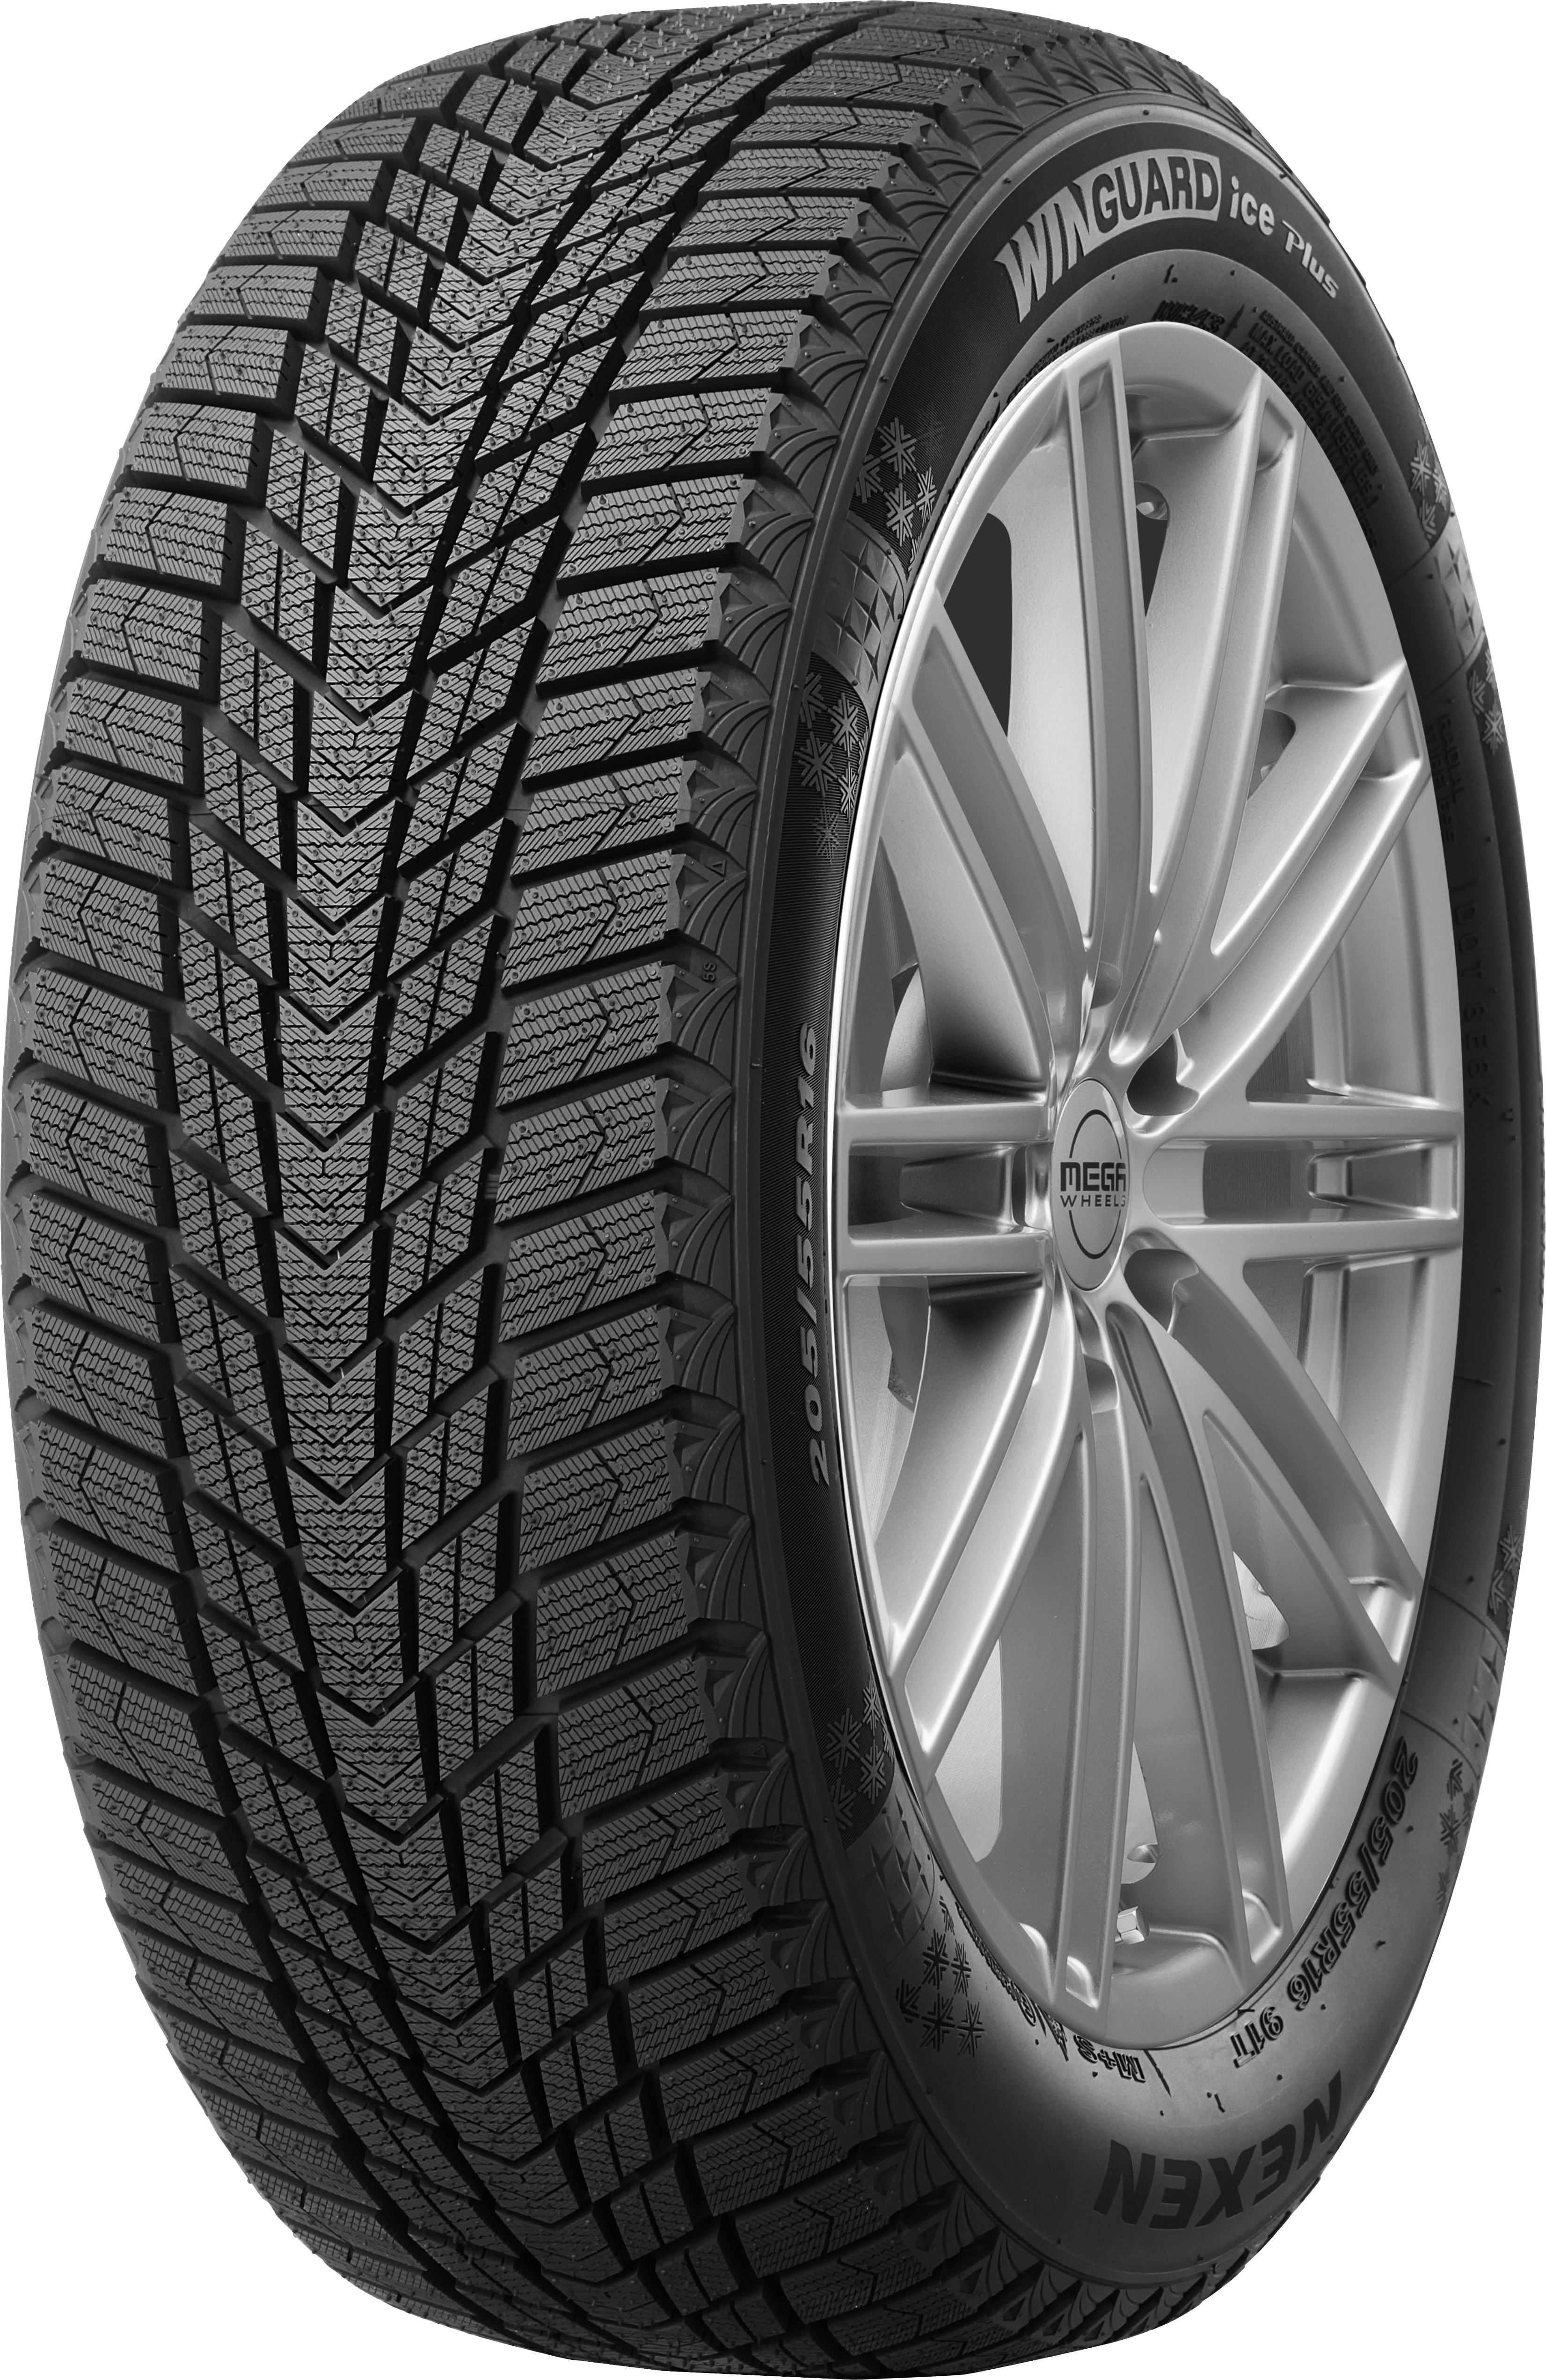 - Ice Nexen Tire Tests WH43 Reviews Plus and Winguard